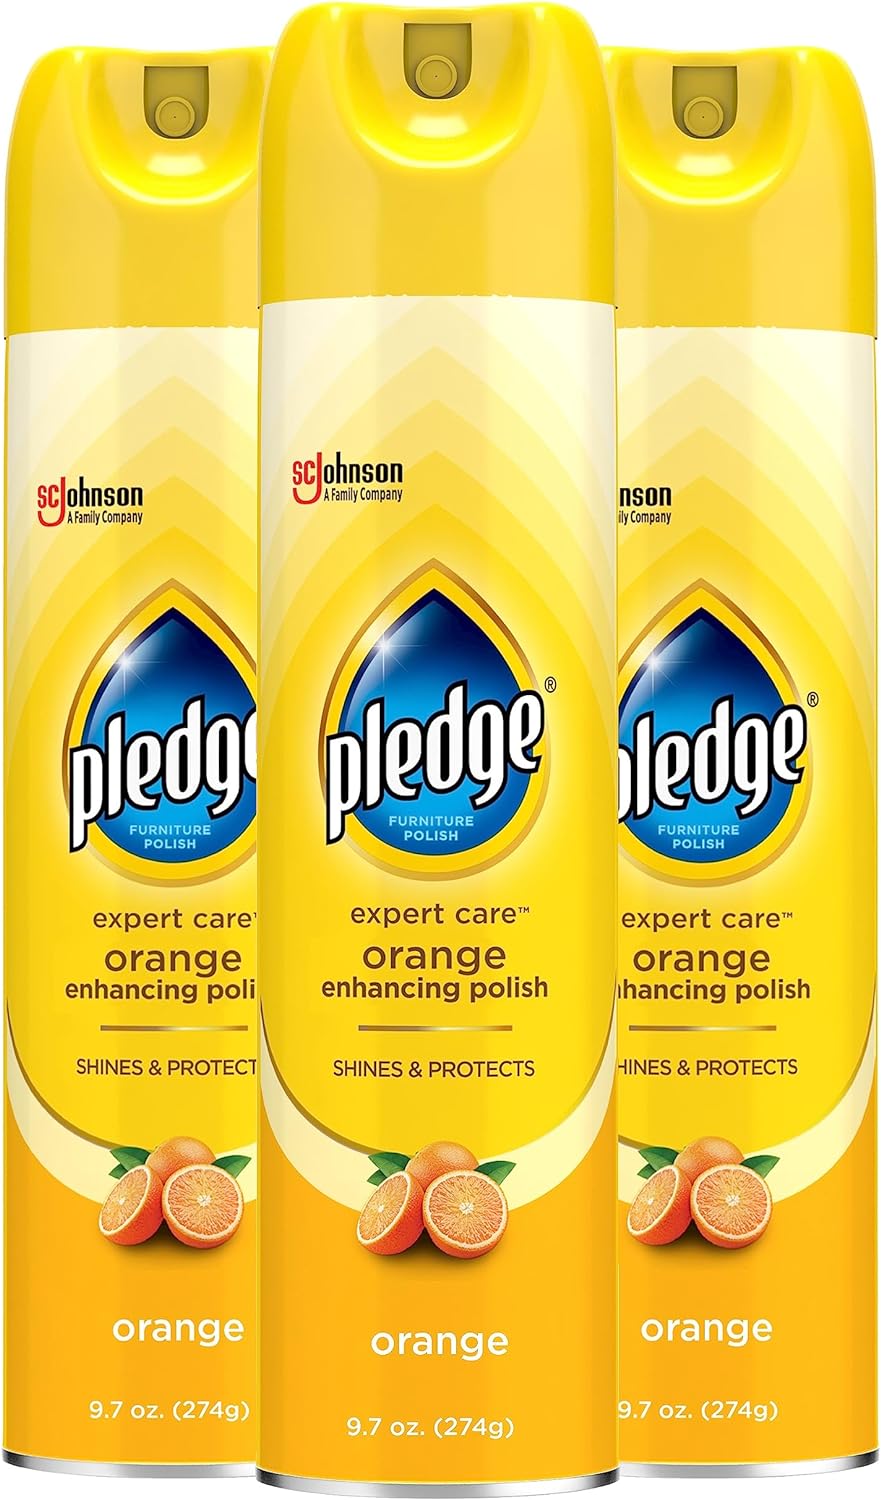 Pledge Expert Care Furniture Polish Spray, Works on Wood, Granite, and Leather, Shine and Protect Furniture Cleaner, Orange, 9.7 Oz, Pack of 3